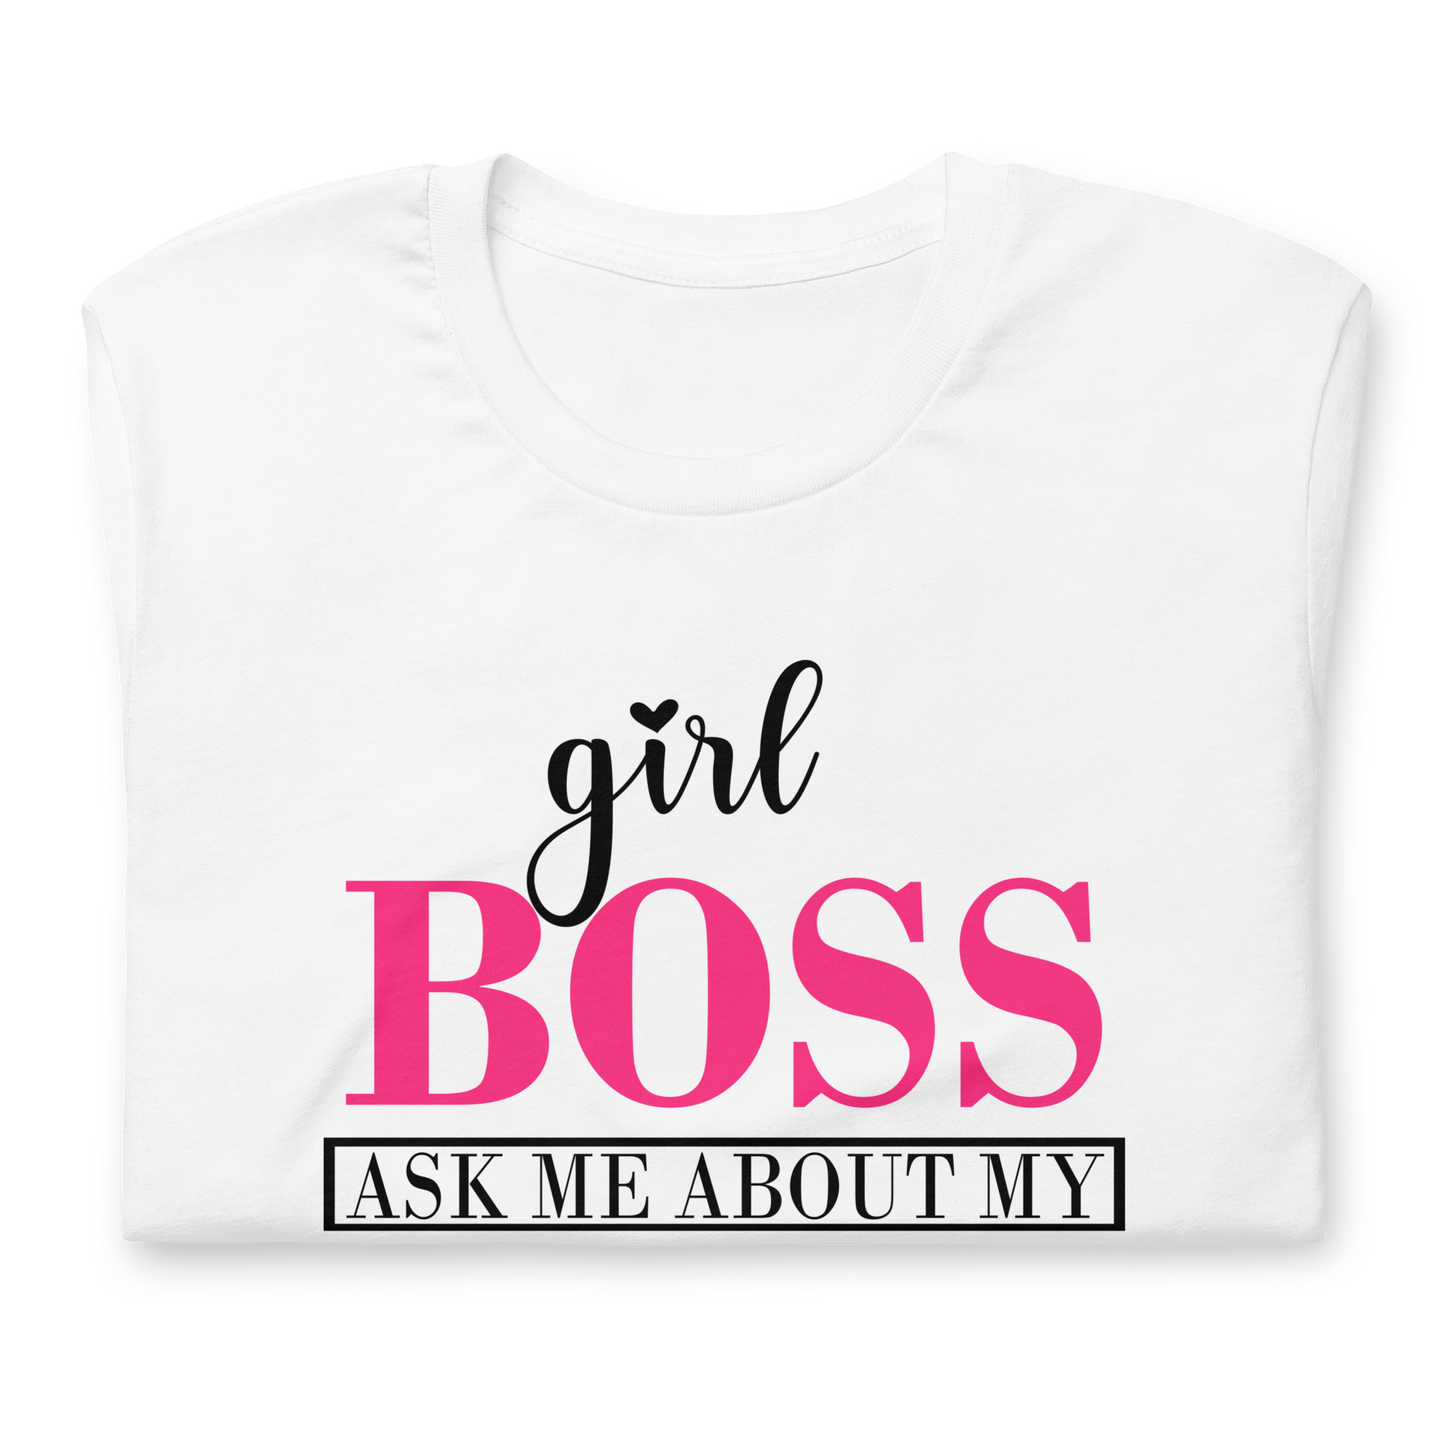 ABOUT MY BUSINESS T-SHIRT